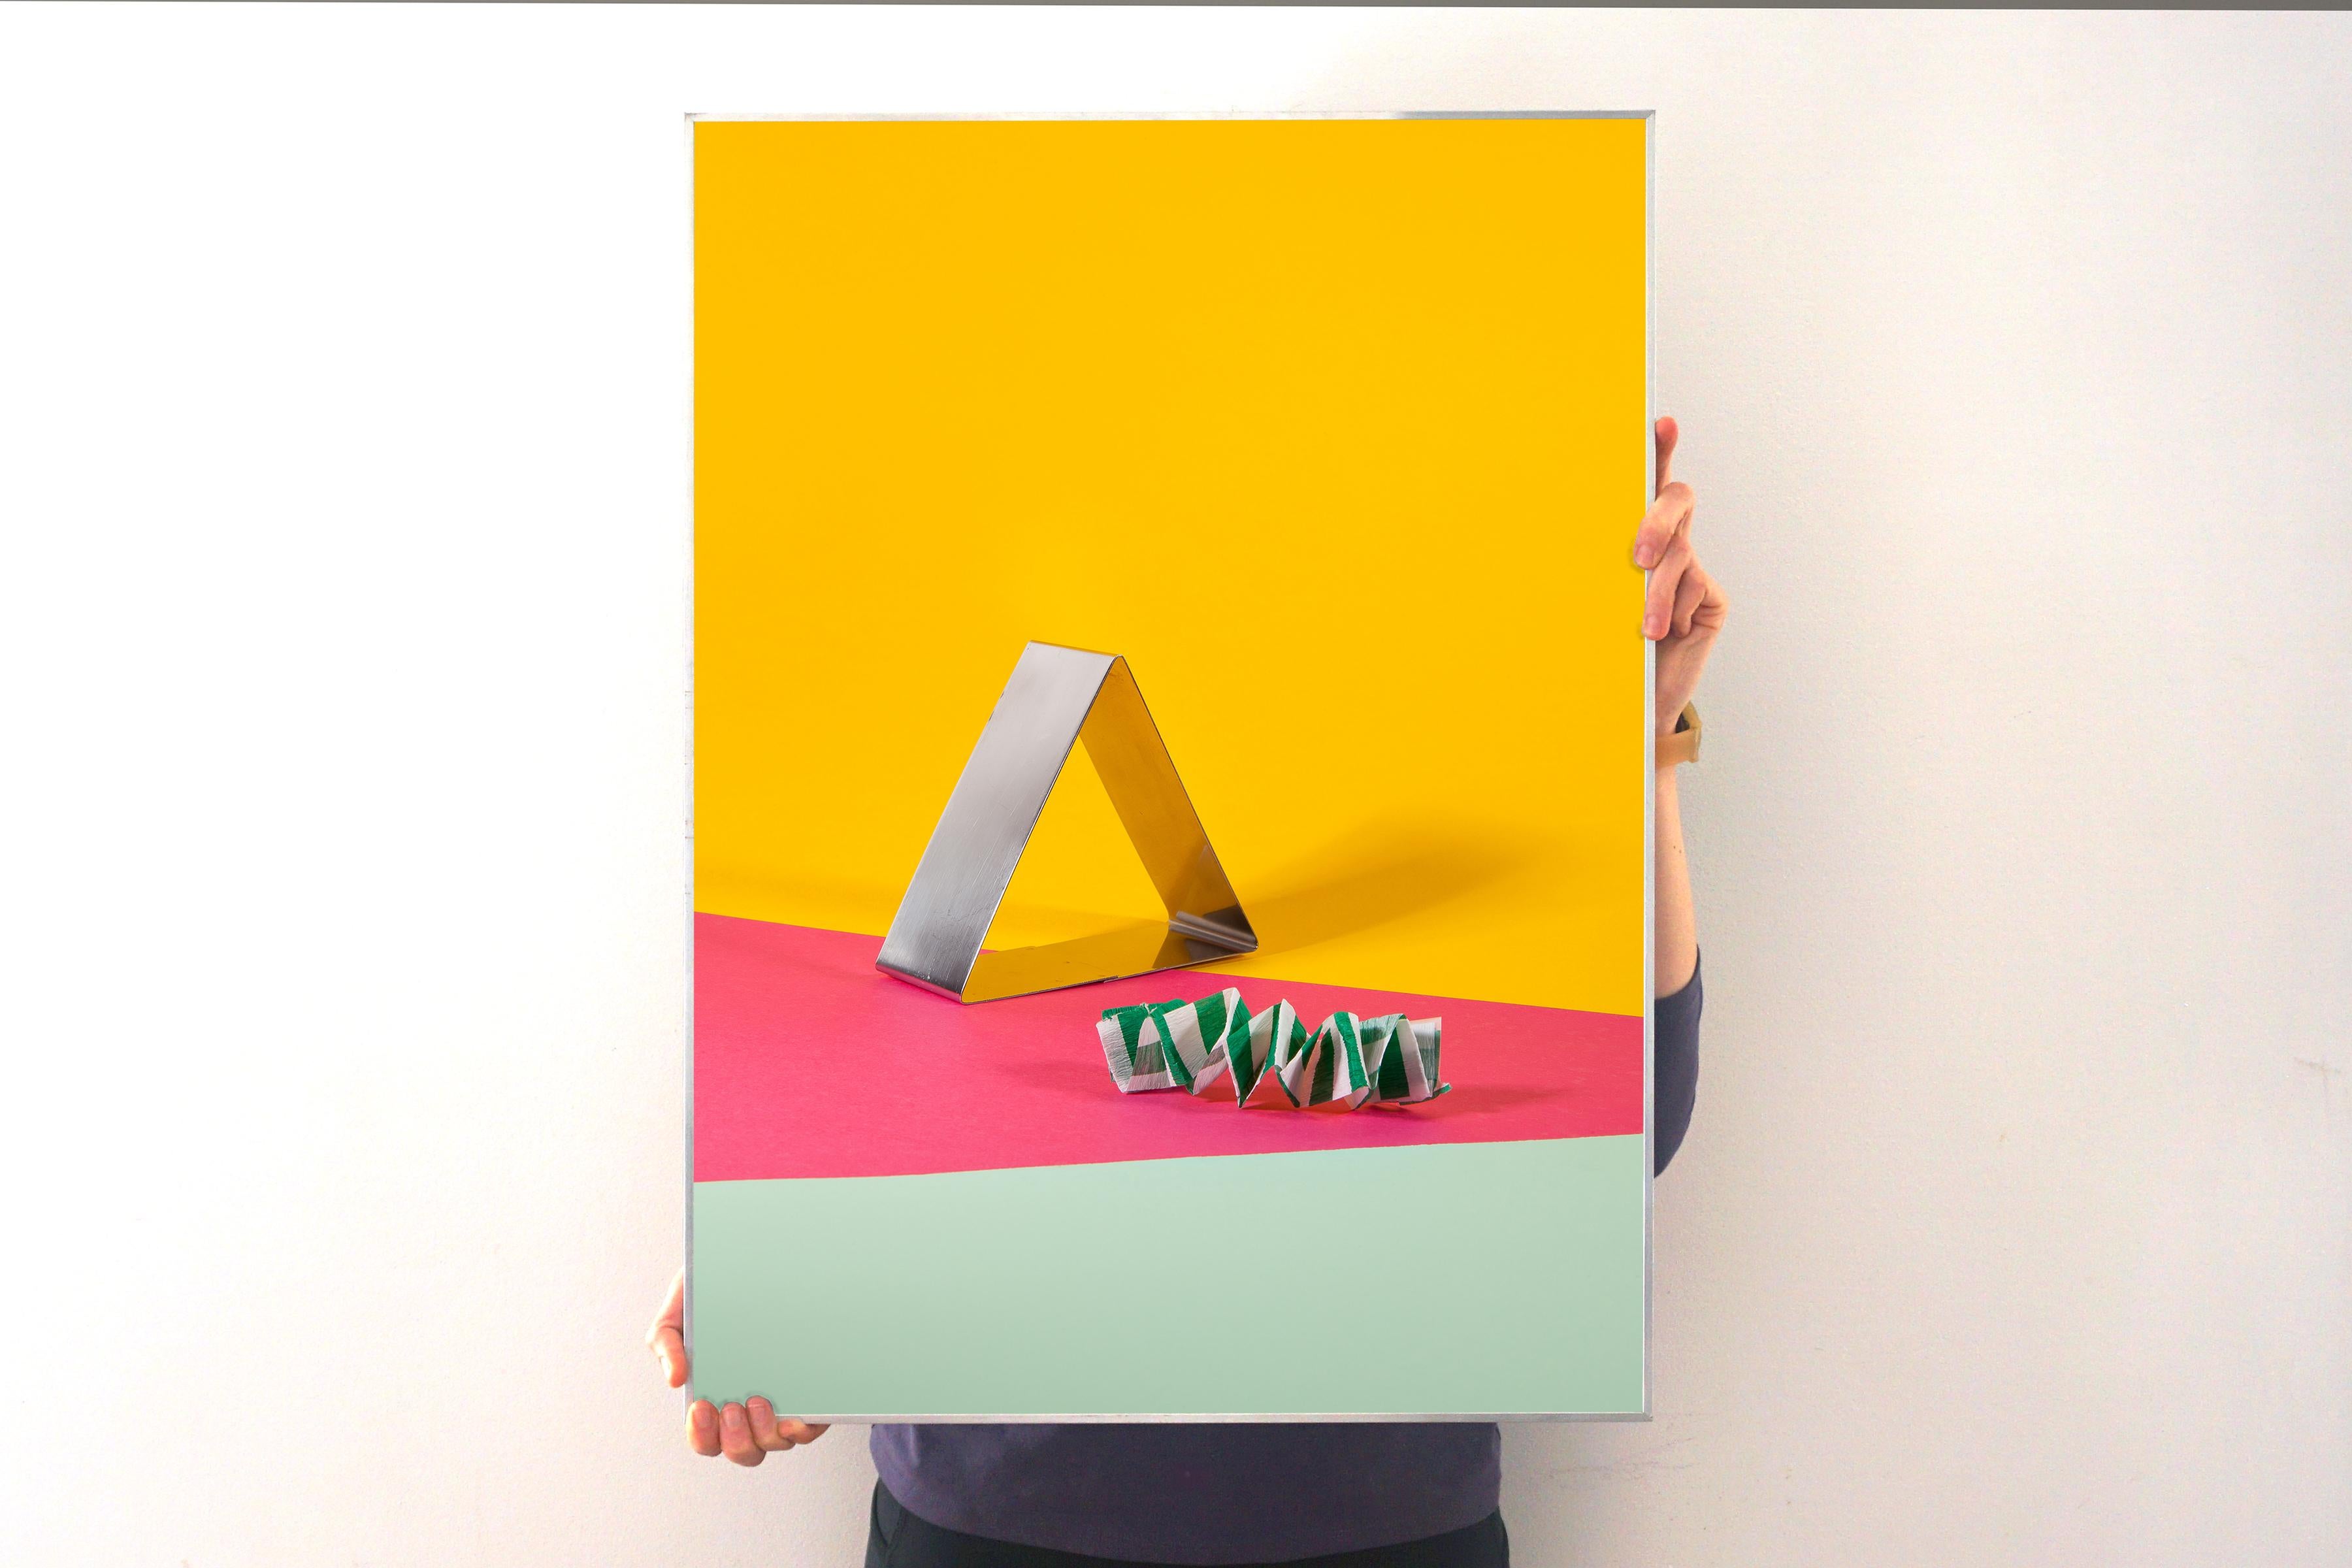 Triangle Architecture Still Life, Yellow, Pink, Green Vivid Tones, Architecture - Modern Print by Ryan Rivadeneyra